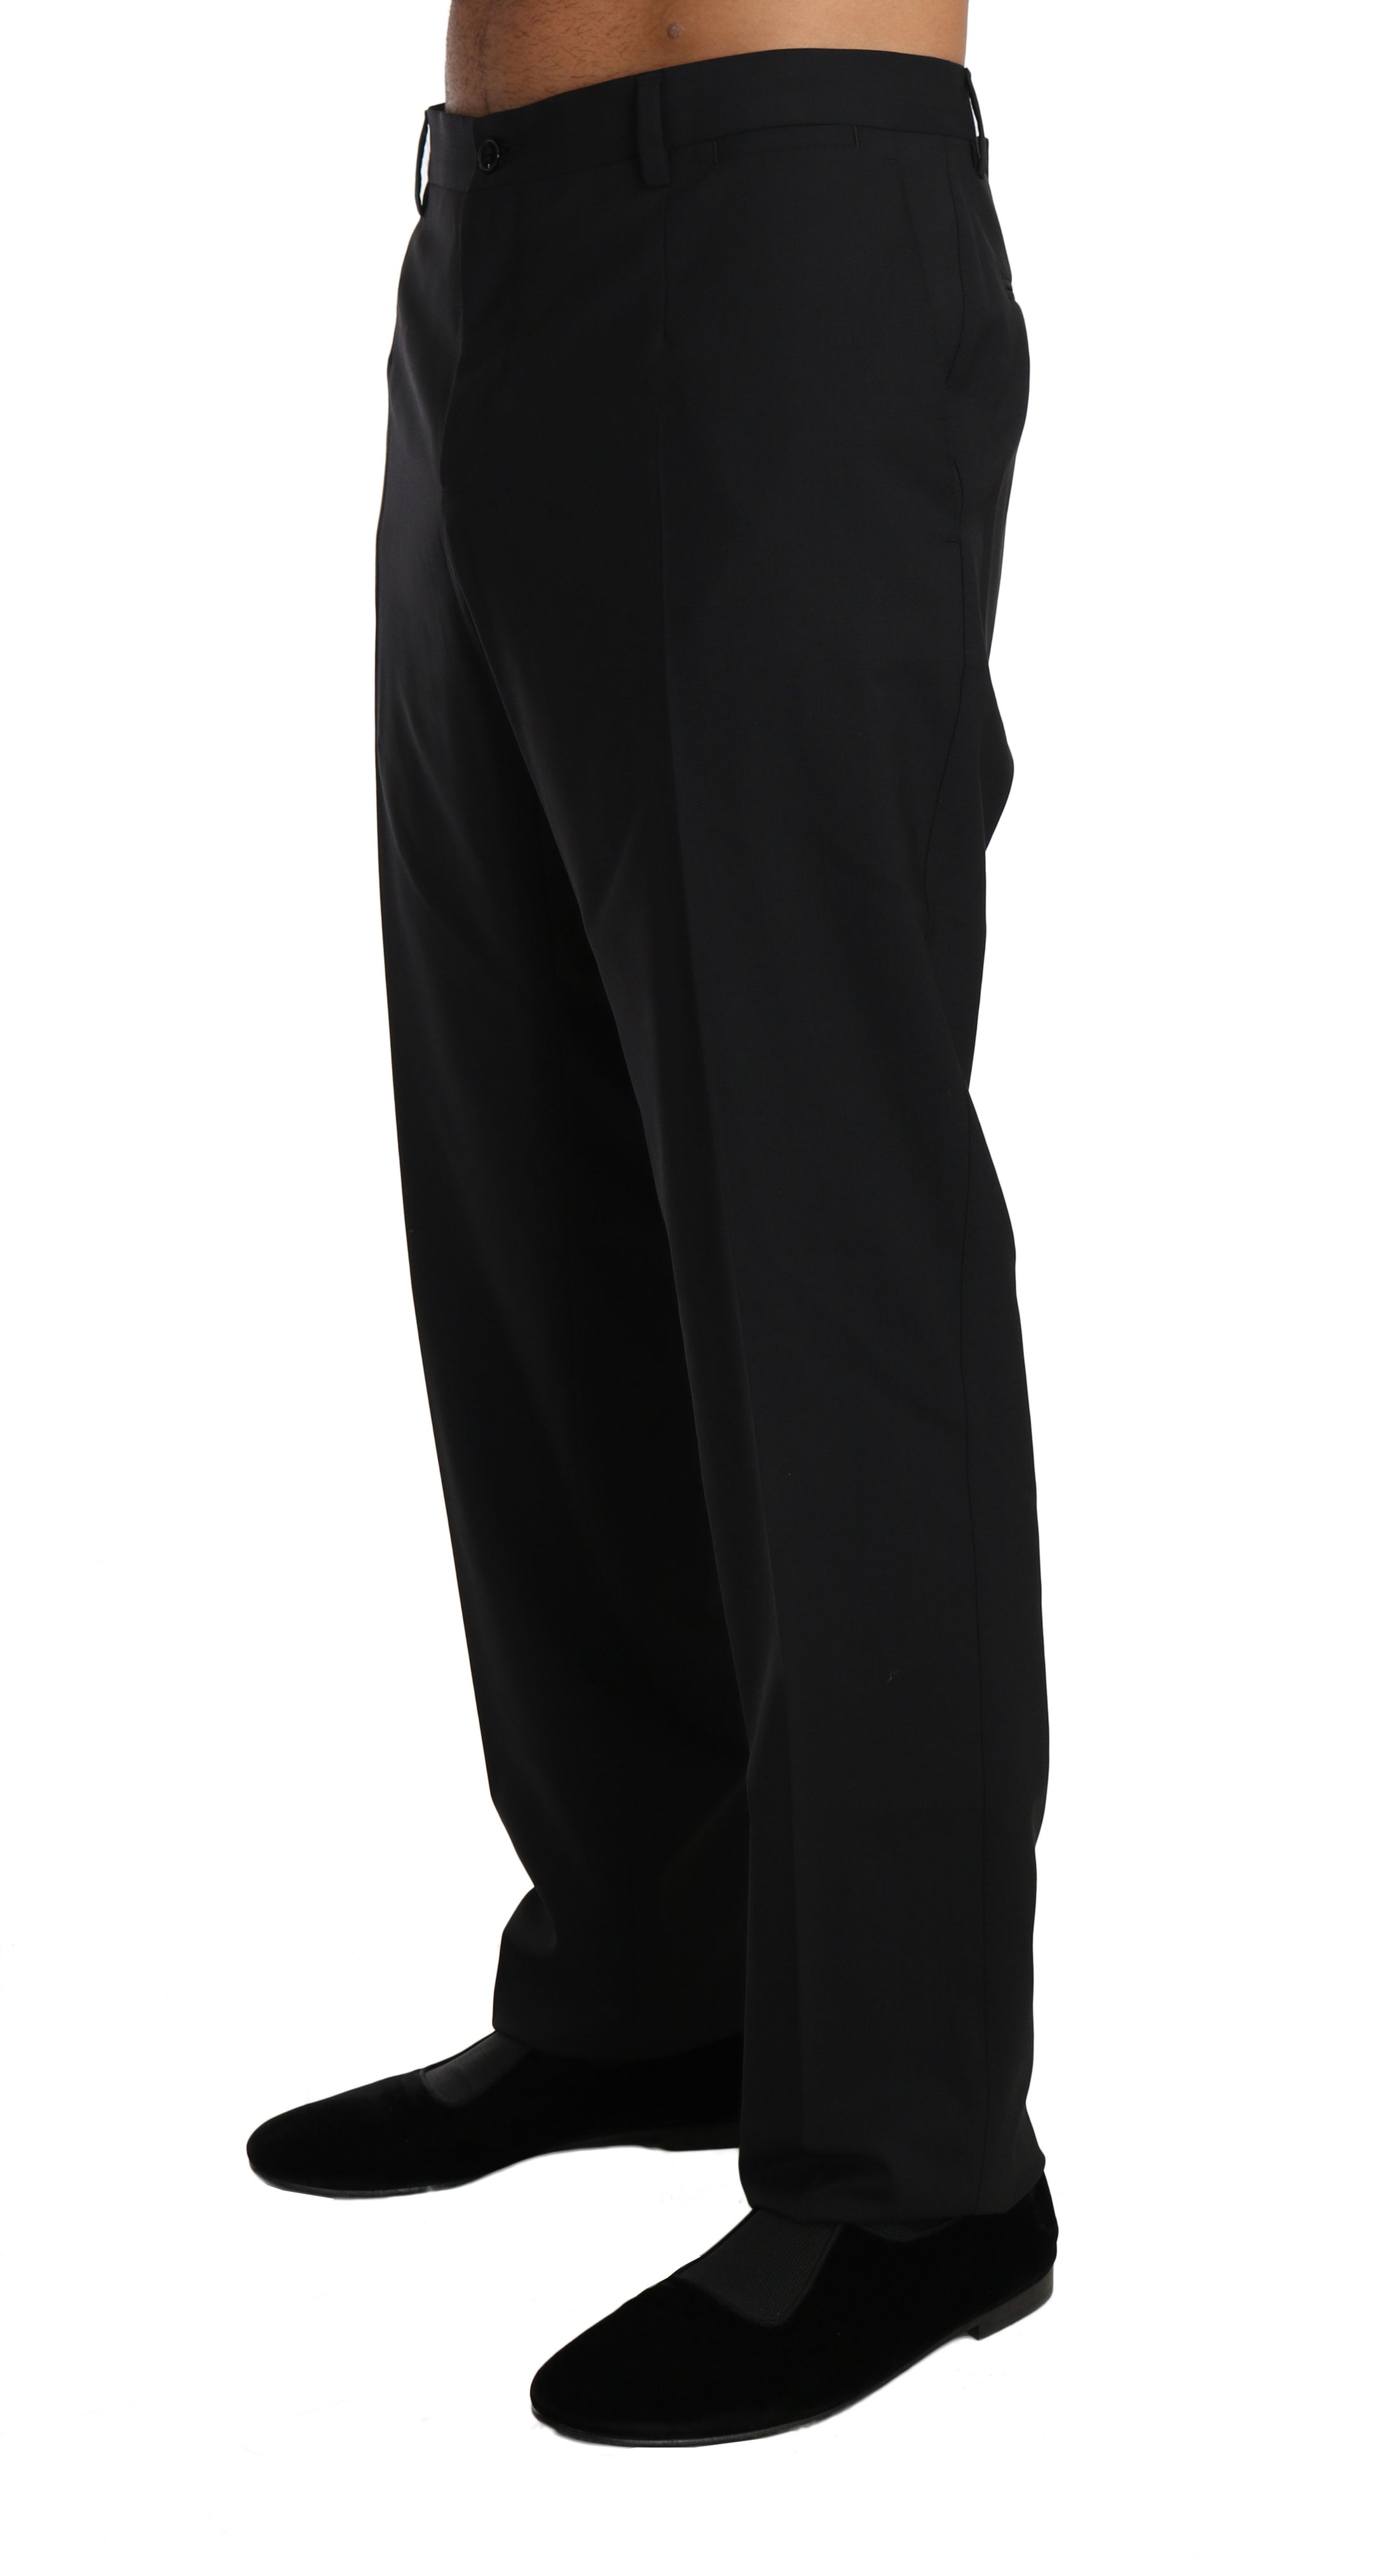 Buy Black Wool Stretch Formal Trousers by Dolce & Gabbana